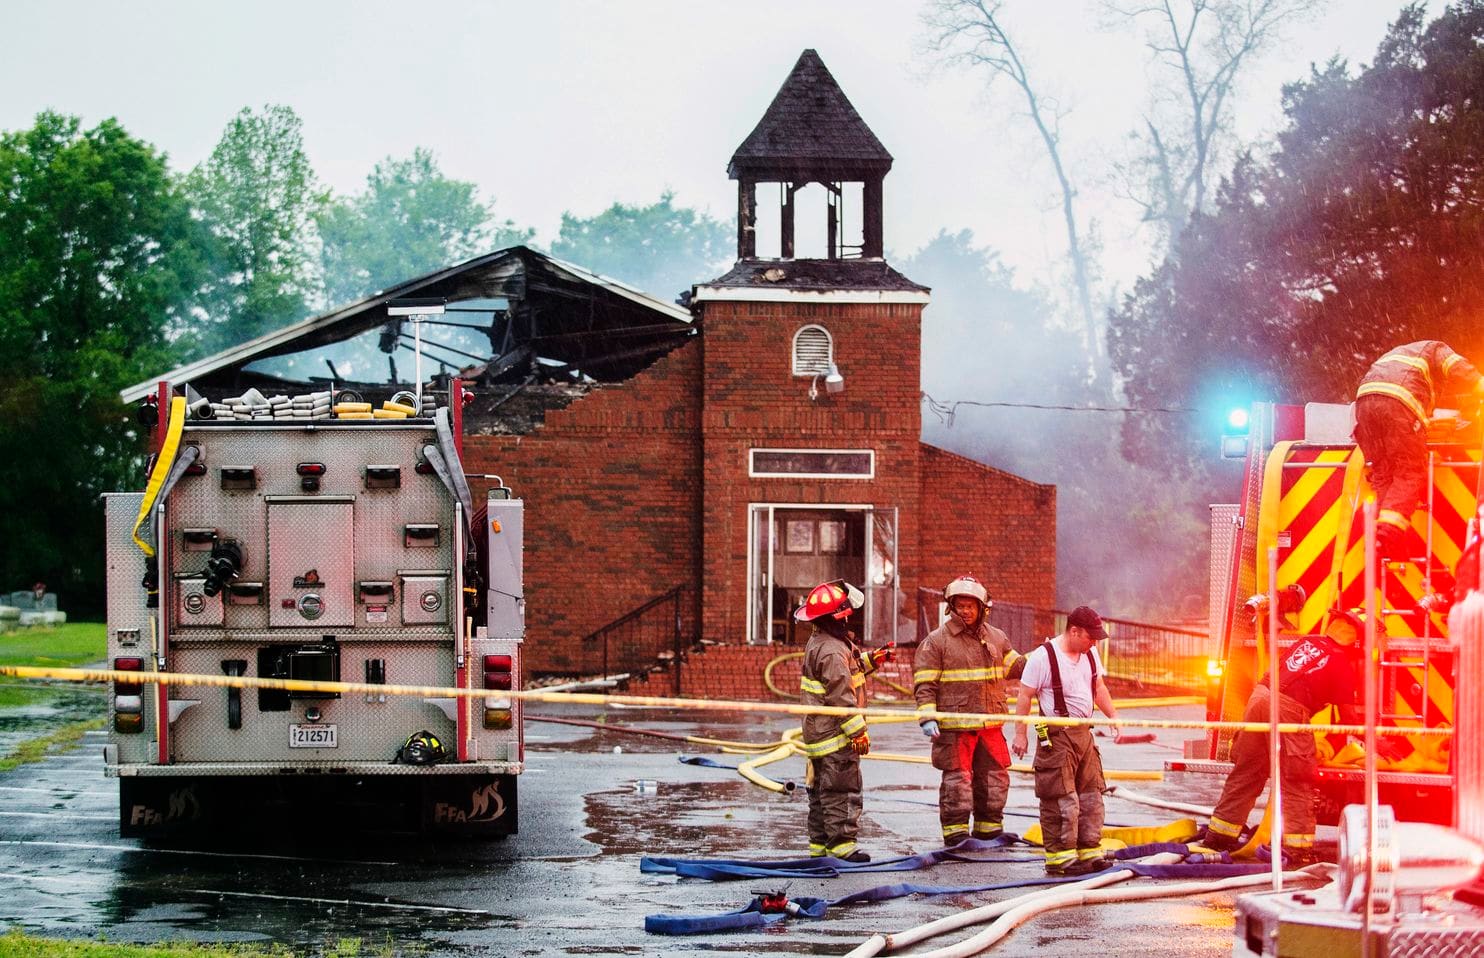 FBI Joins Investigation Of Suspicious Fires At Three Historically Black Churches In Louisiana